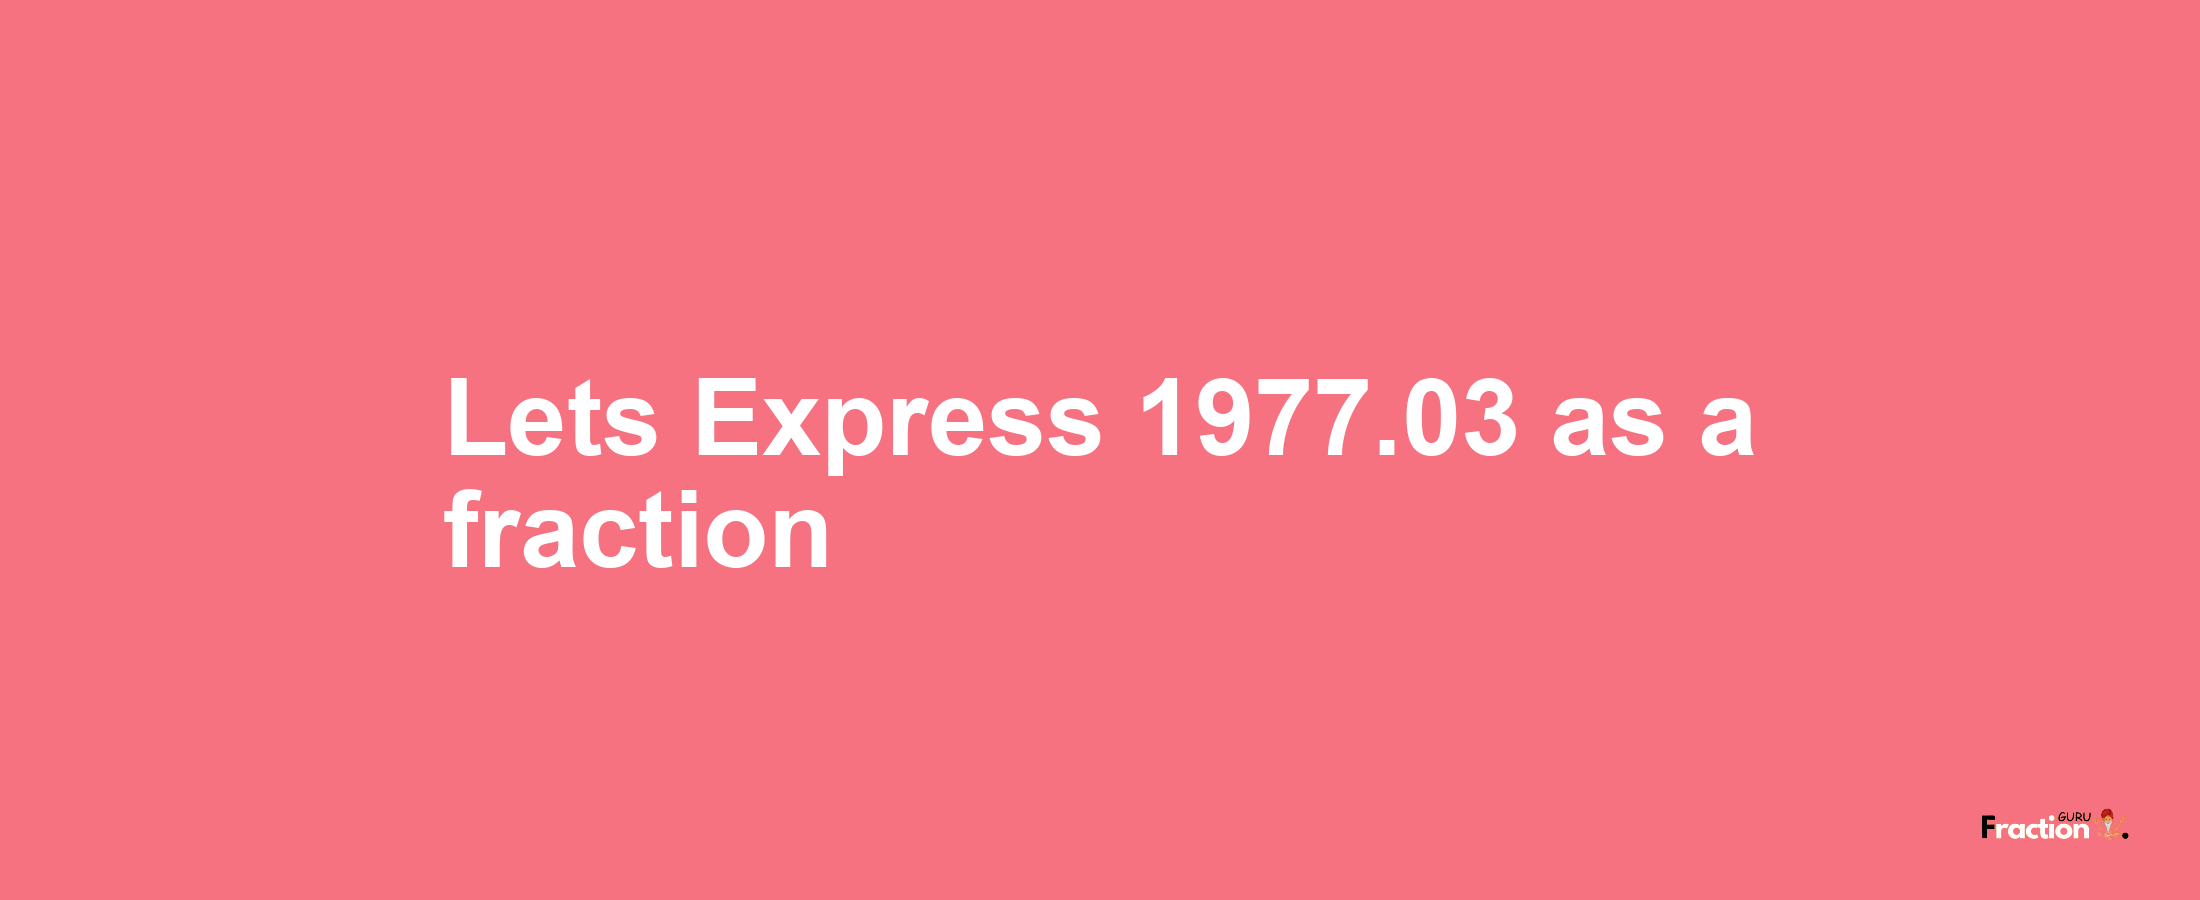 Lets Express 1977.03 as afraction